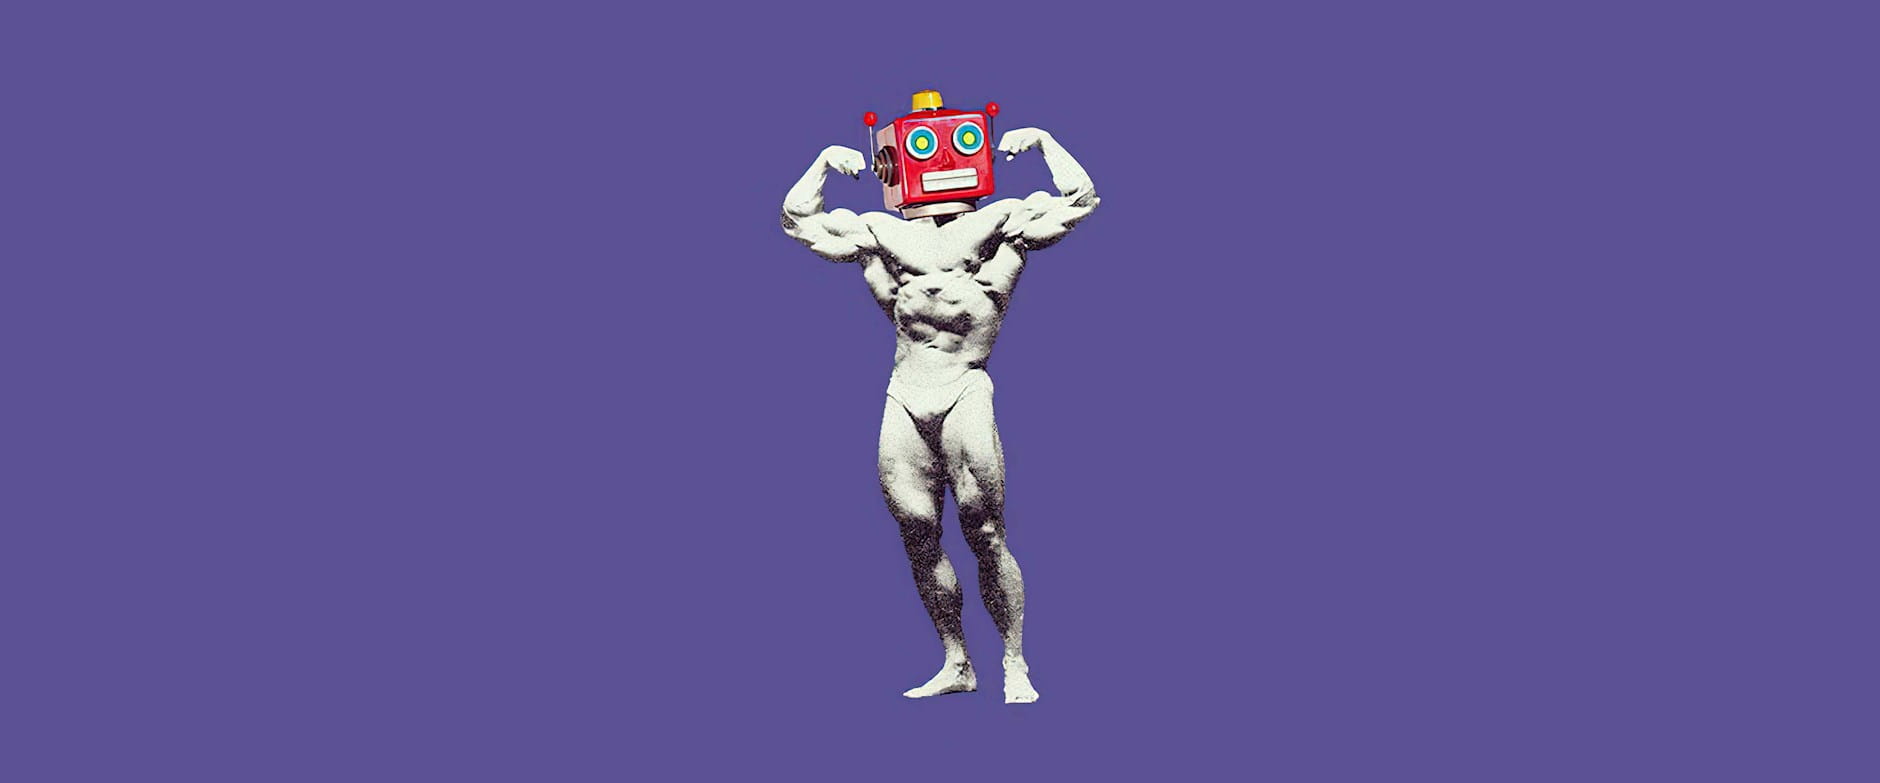 Robot with muscular statue body flexing